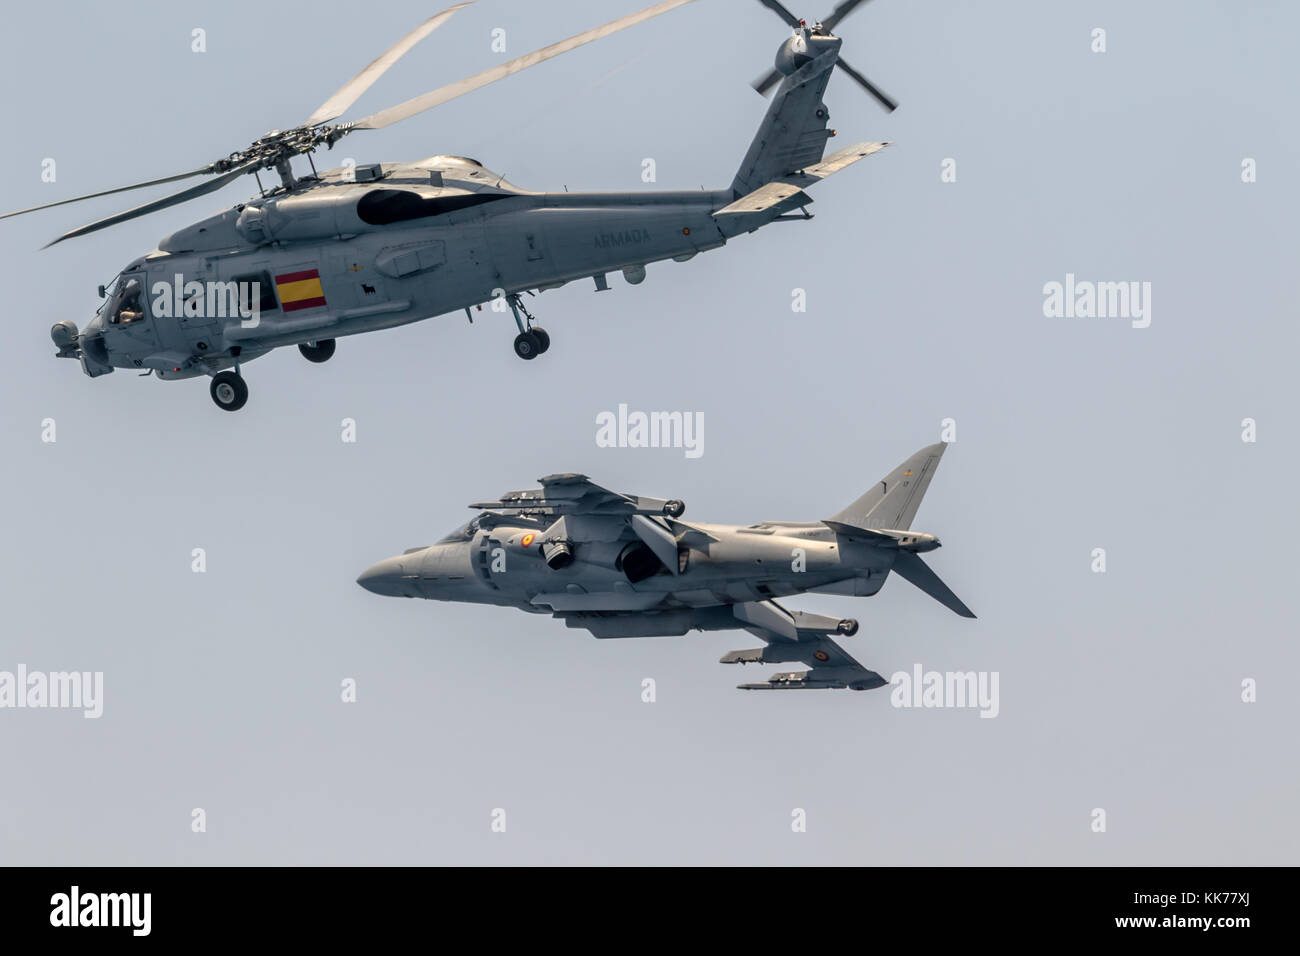 MOTRIL, GRANADA, SPAIN-JUN 11: Aircraft AV-8B Harrier Plus and  helicopter SH-60 Seahawk taking part in an exhibition on the 12th international airsho Stock Photo